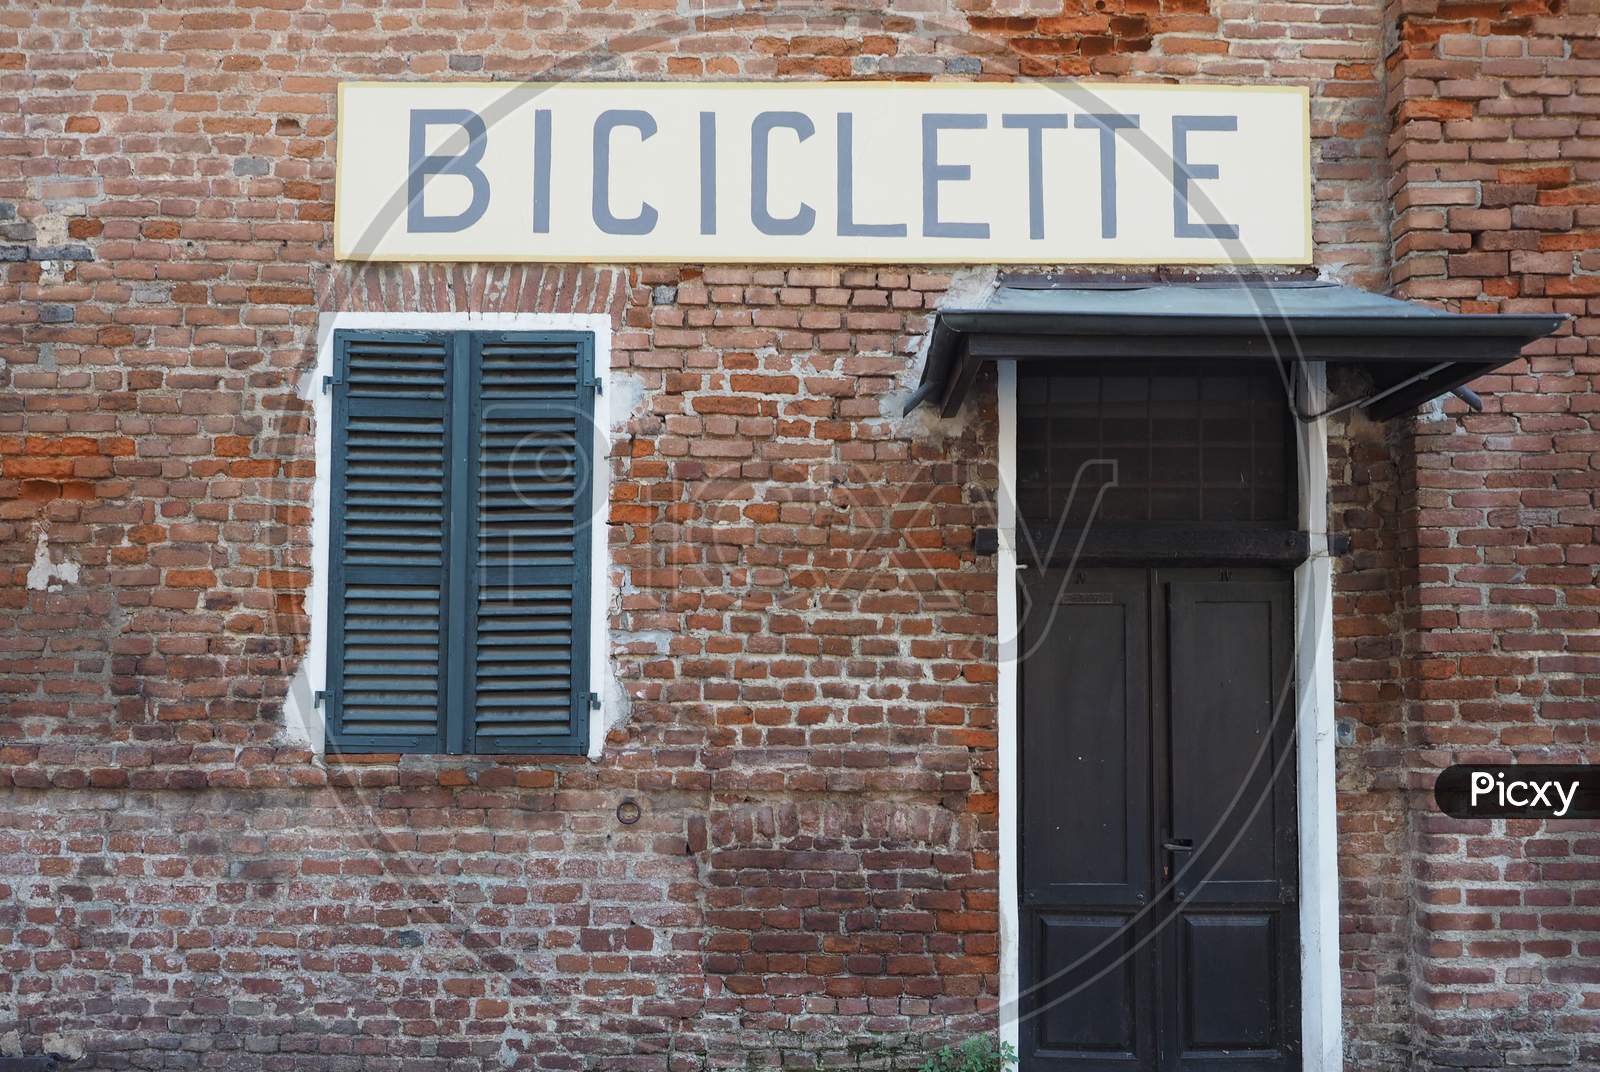 Biciclette (Bicycles) Sign